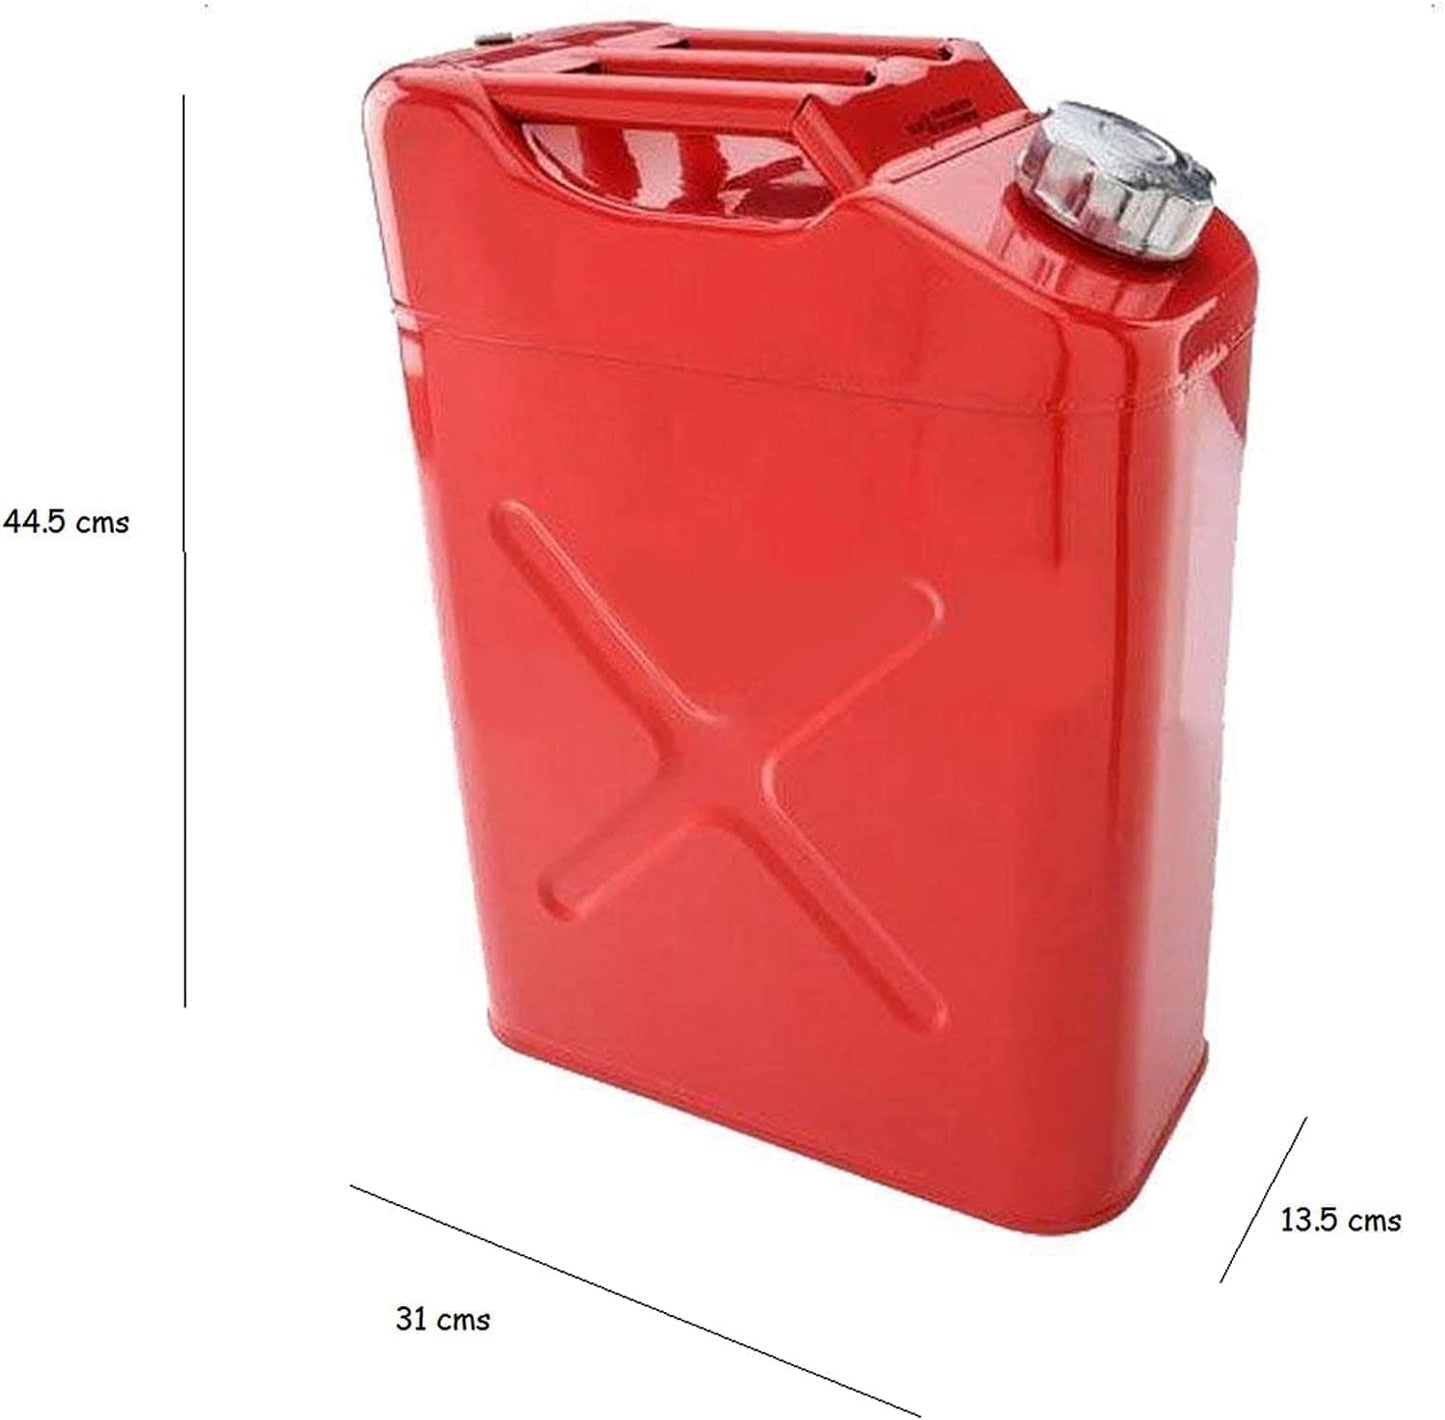 20L 5 Gallon Steel Fuel Gasoline Petrol Diesel Jerry Can Tank Container Backup (1) Hygrad Built to Survive